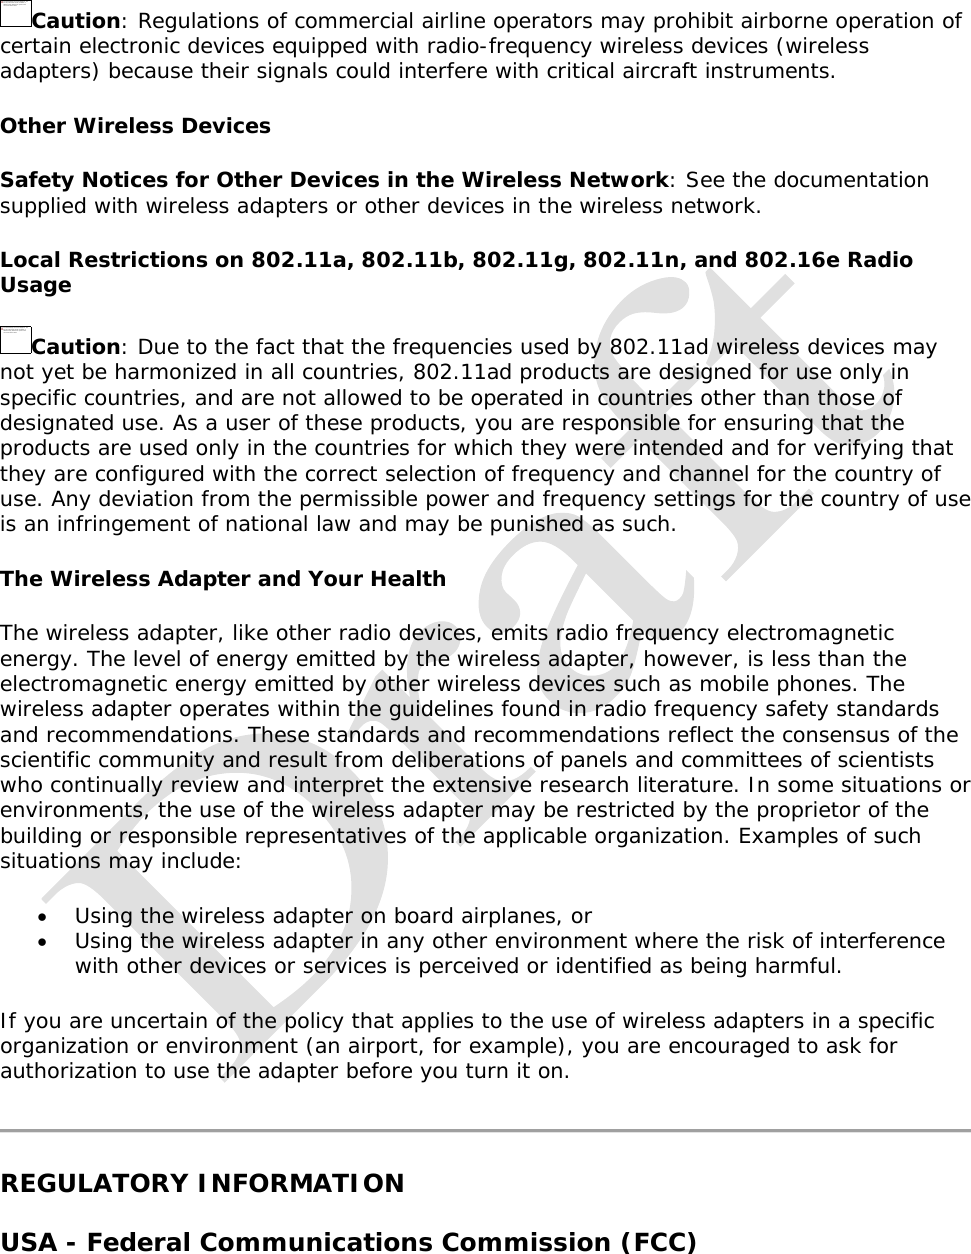   Caution: Regulations of commercial airline operators may prohibit airborne operation of certain electronic devices equipped with radio-frequency wireless devices (wireless adapters) because their signals could interfere with critical aircraft instruments. Other Wireless Devices Safety Notices for Other Devices in the Wireless Network: See the documentation supplied with wireless adapters or other devices in the wireless network.  Local Restrictions on 802.11a, 802.11b, 802.11g, 802.11n, and 802.16e Radio Usage Caution: Due to the fact that the frequencies used by 802.11ad wireless devices may not yet be harmonized in all countries, 802.11ad products are designed for use only in specific countries, and are not allowed to be operated in countries other than those of designated use. As a user of these products, you are responsible for ensuring that the products are used only in the countries for which they were intended and for verifying that they are configured with the correct selection of frequency and channel for the country of use. Any deviation from the permissible power and frequency settings for the country of use is an infringement of national law and may be punished as such.  The Wireless Adapter and Your Health  The wireless adapter, like other radio devices, emits radio frequency electromagnetic energy. The level of energy emitted by the wireless adapter, however, is less than the electromagnetic energy emitted by other wireless devices such as mobile phones. The wireless adapter operates within the guidelines found in radio frequency safety standards and recommendations. These standards and recommendations reflect the consensus of the scientific community and result from deliberations of panels and committees of scientists who continually review and interpret the extensive research literature. In some situations or environments, the use of the wireless adapter may be restricted by the proprietor of the building or responsible representatives of the applicable organization. Examples of such situations may include:  Using the wireless adapter on board airplanes, or  Using the wireless adapter in any other environment where the risk of interference with other devices or services is perceived or identified as being harmful. If you are uncertain of the policy that applies to the use of wireless adapters in a specific organization or environment (an airport, for example), you are encouraged to ask for authorization to use the adapter before you turn it on.   REGULATORY INFORMATION USA - Federal Communications Commission (FCC) The linked image cannot be displayed.  The file may have been moved, renamed, or deleted. Verify  that the lin k po ints to the  correct file an d locatio n.The linked image cannot be displayed.  The file may have been moved, renamed, or deleted. Verify  that the lin k po ints to the  correct file an d locatio n.